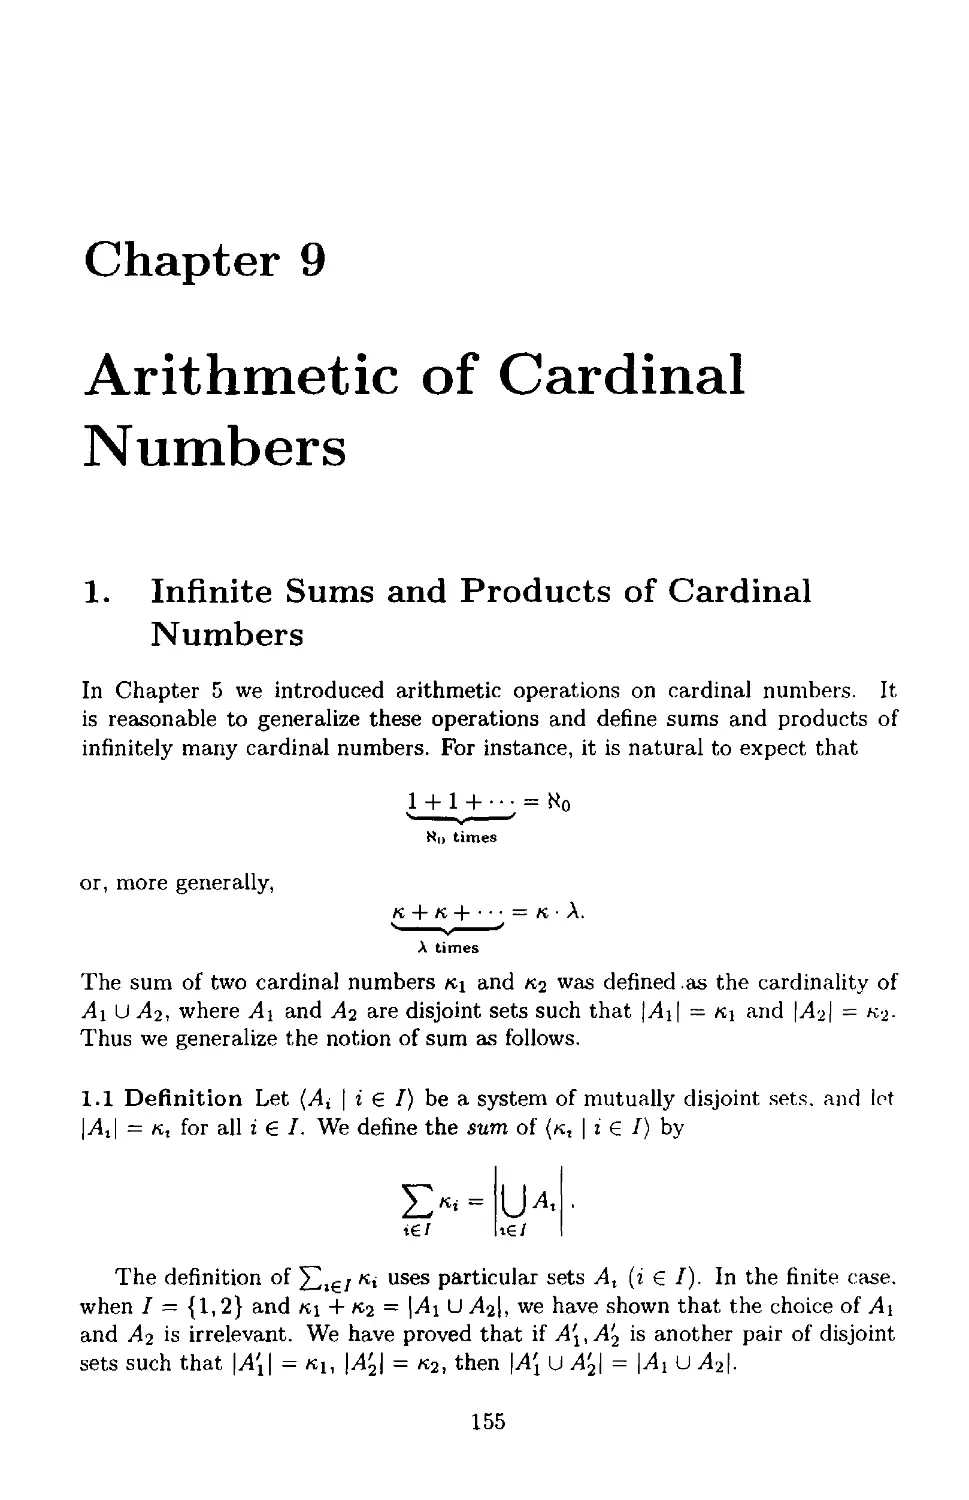 Chapter 9 Arithmetic of Cardinal Numbers